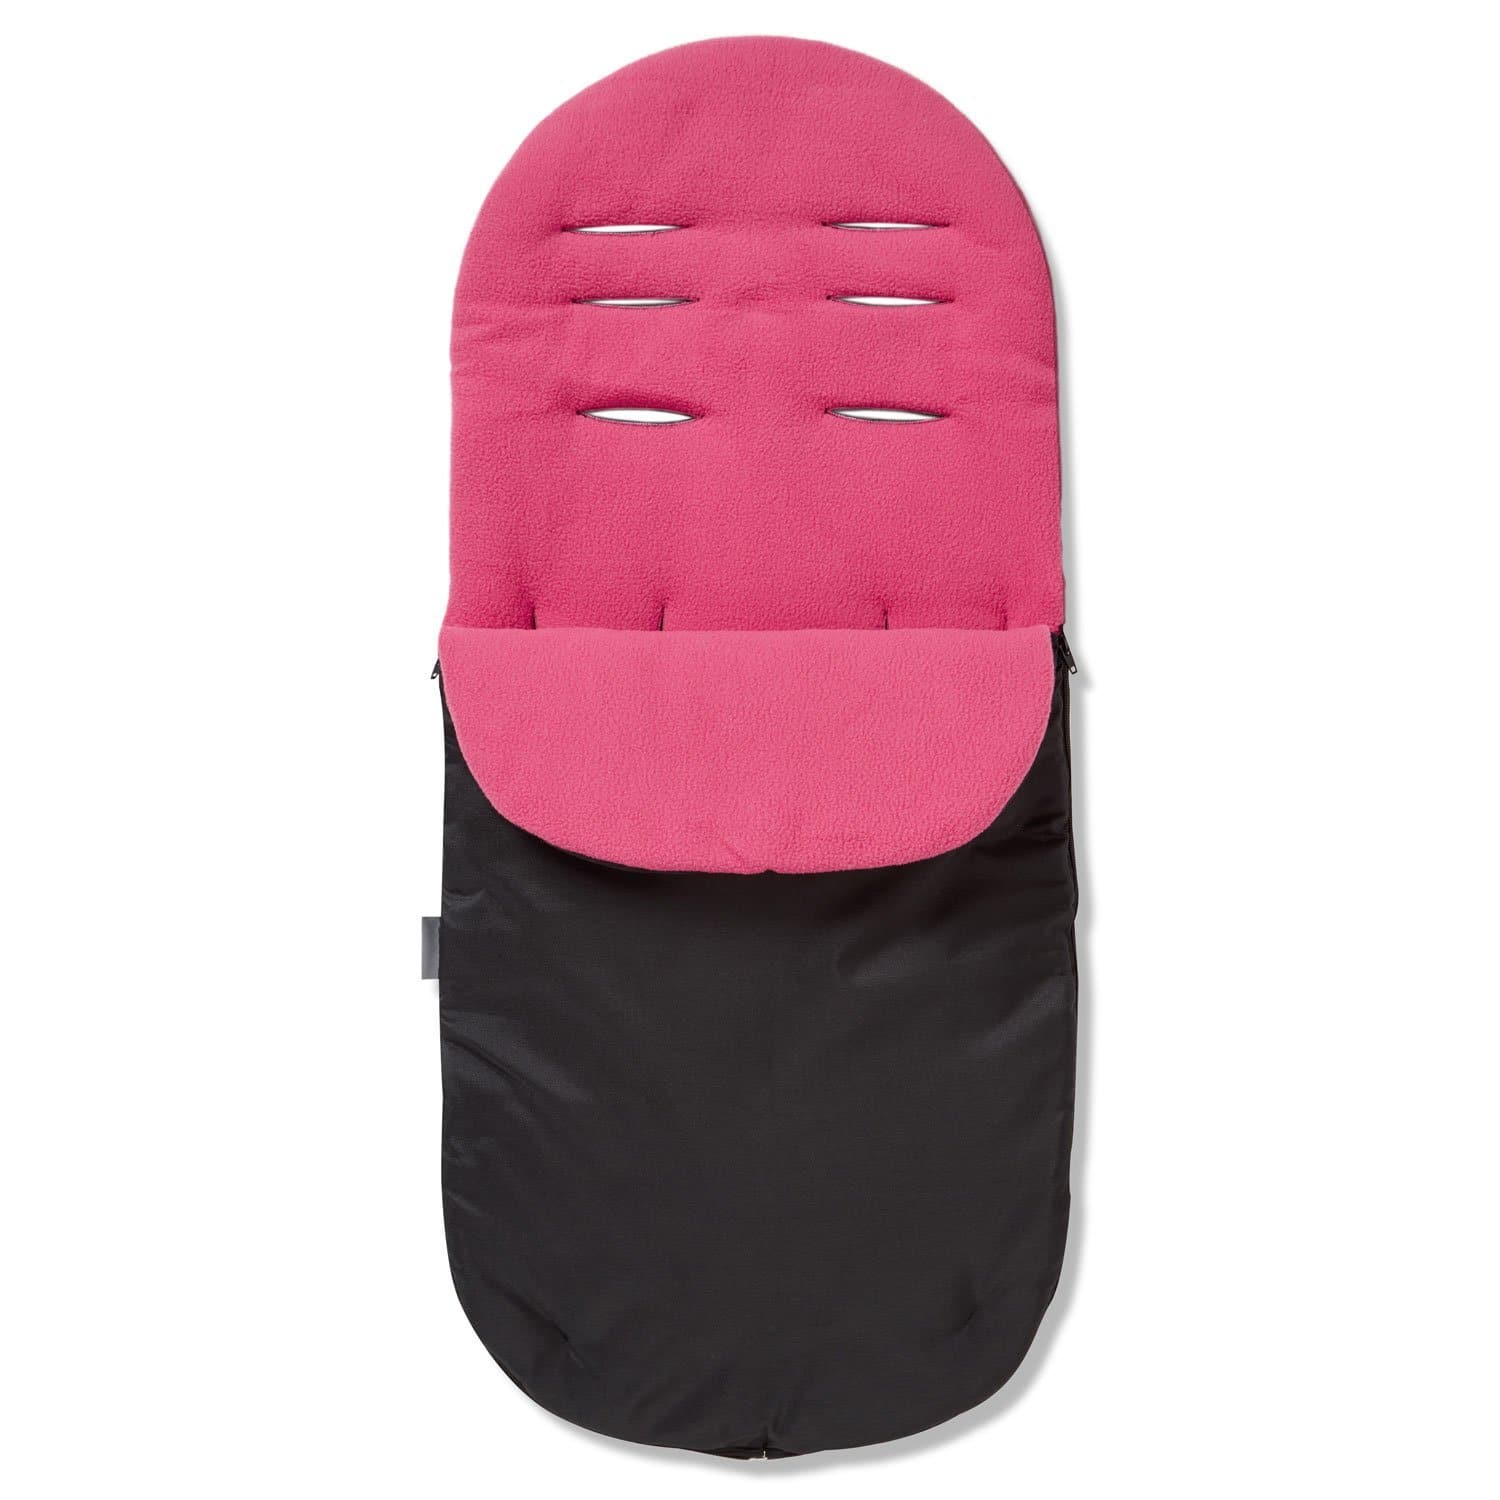 Footmuff / Cosy Toes Compatible with Mothercare - Dark Pink / Fits All Models | For Your Little One